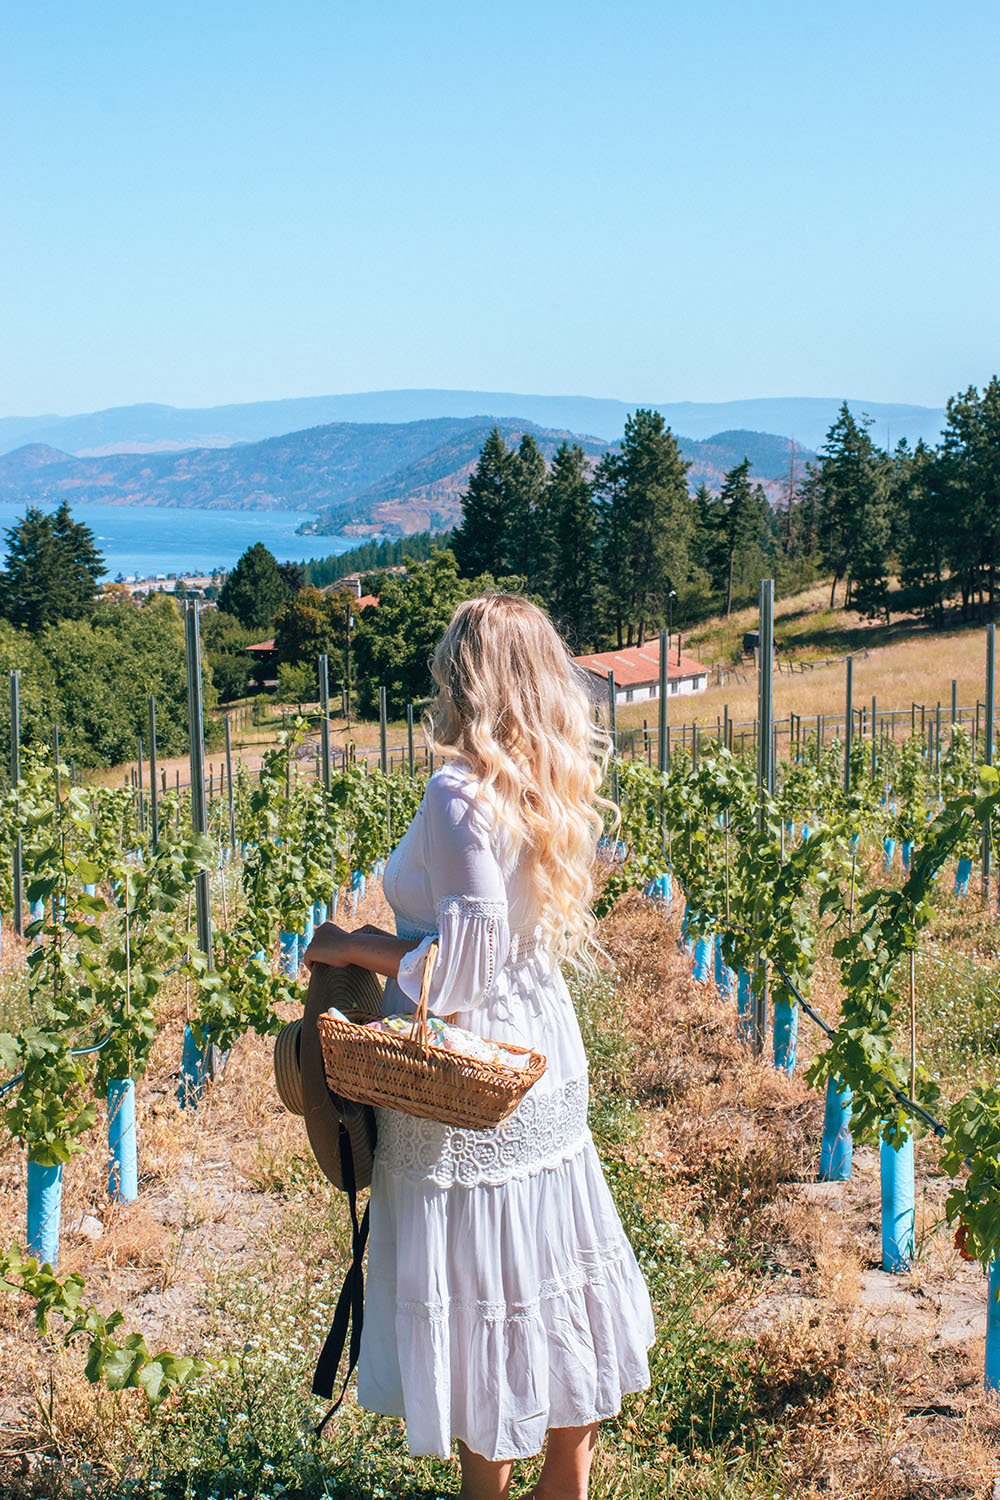 Planning a trip to Kelowna soon? This guide covers all the best things to do in Kelowna from a locals perspective! From wineries and cideries, to adventure activities, hikes, waters sports and more. This guide has everything you need to plan your visit to beautiful Kelowna! Pictured here: Black Swift Vineyards